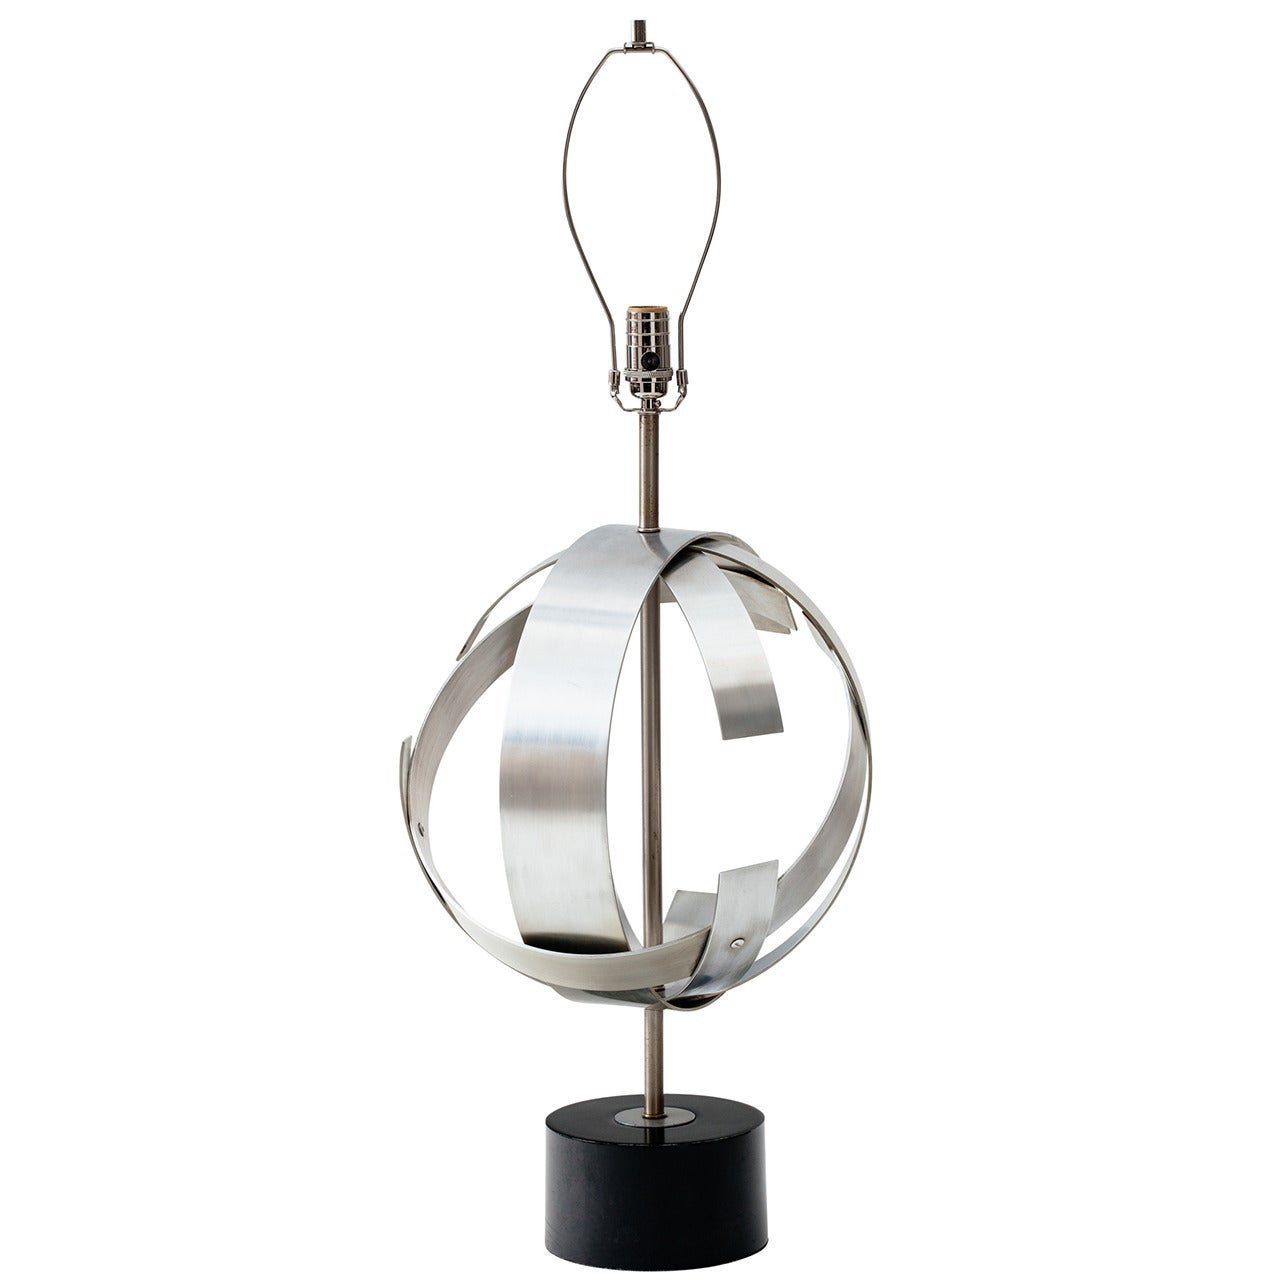 Abstract Aluminum Sphere Lamp by Laurel Lighting Company, circa 1970